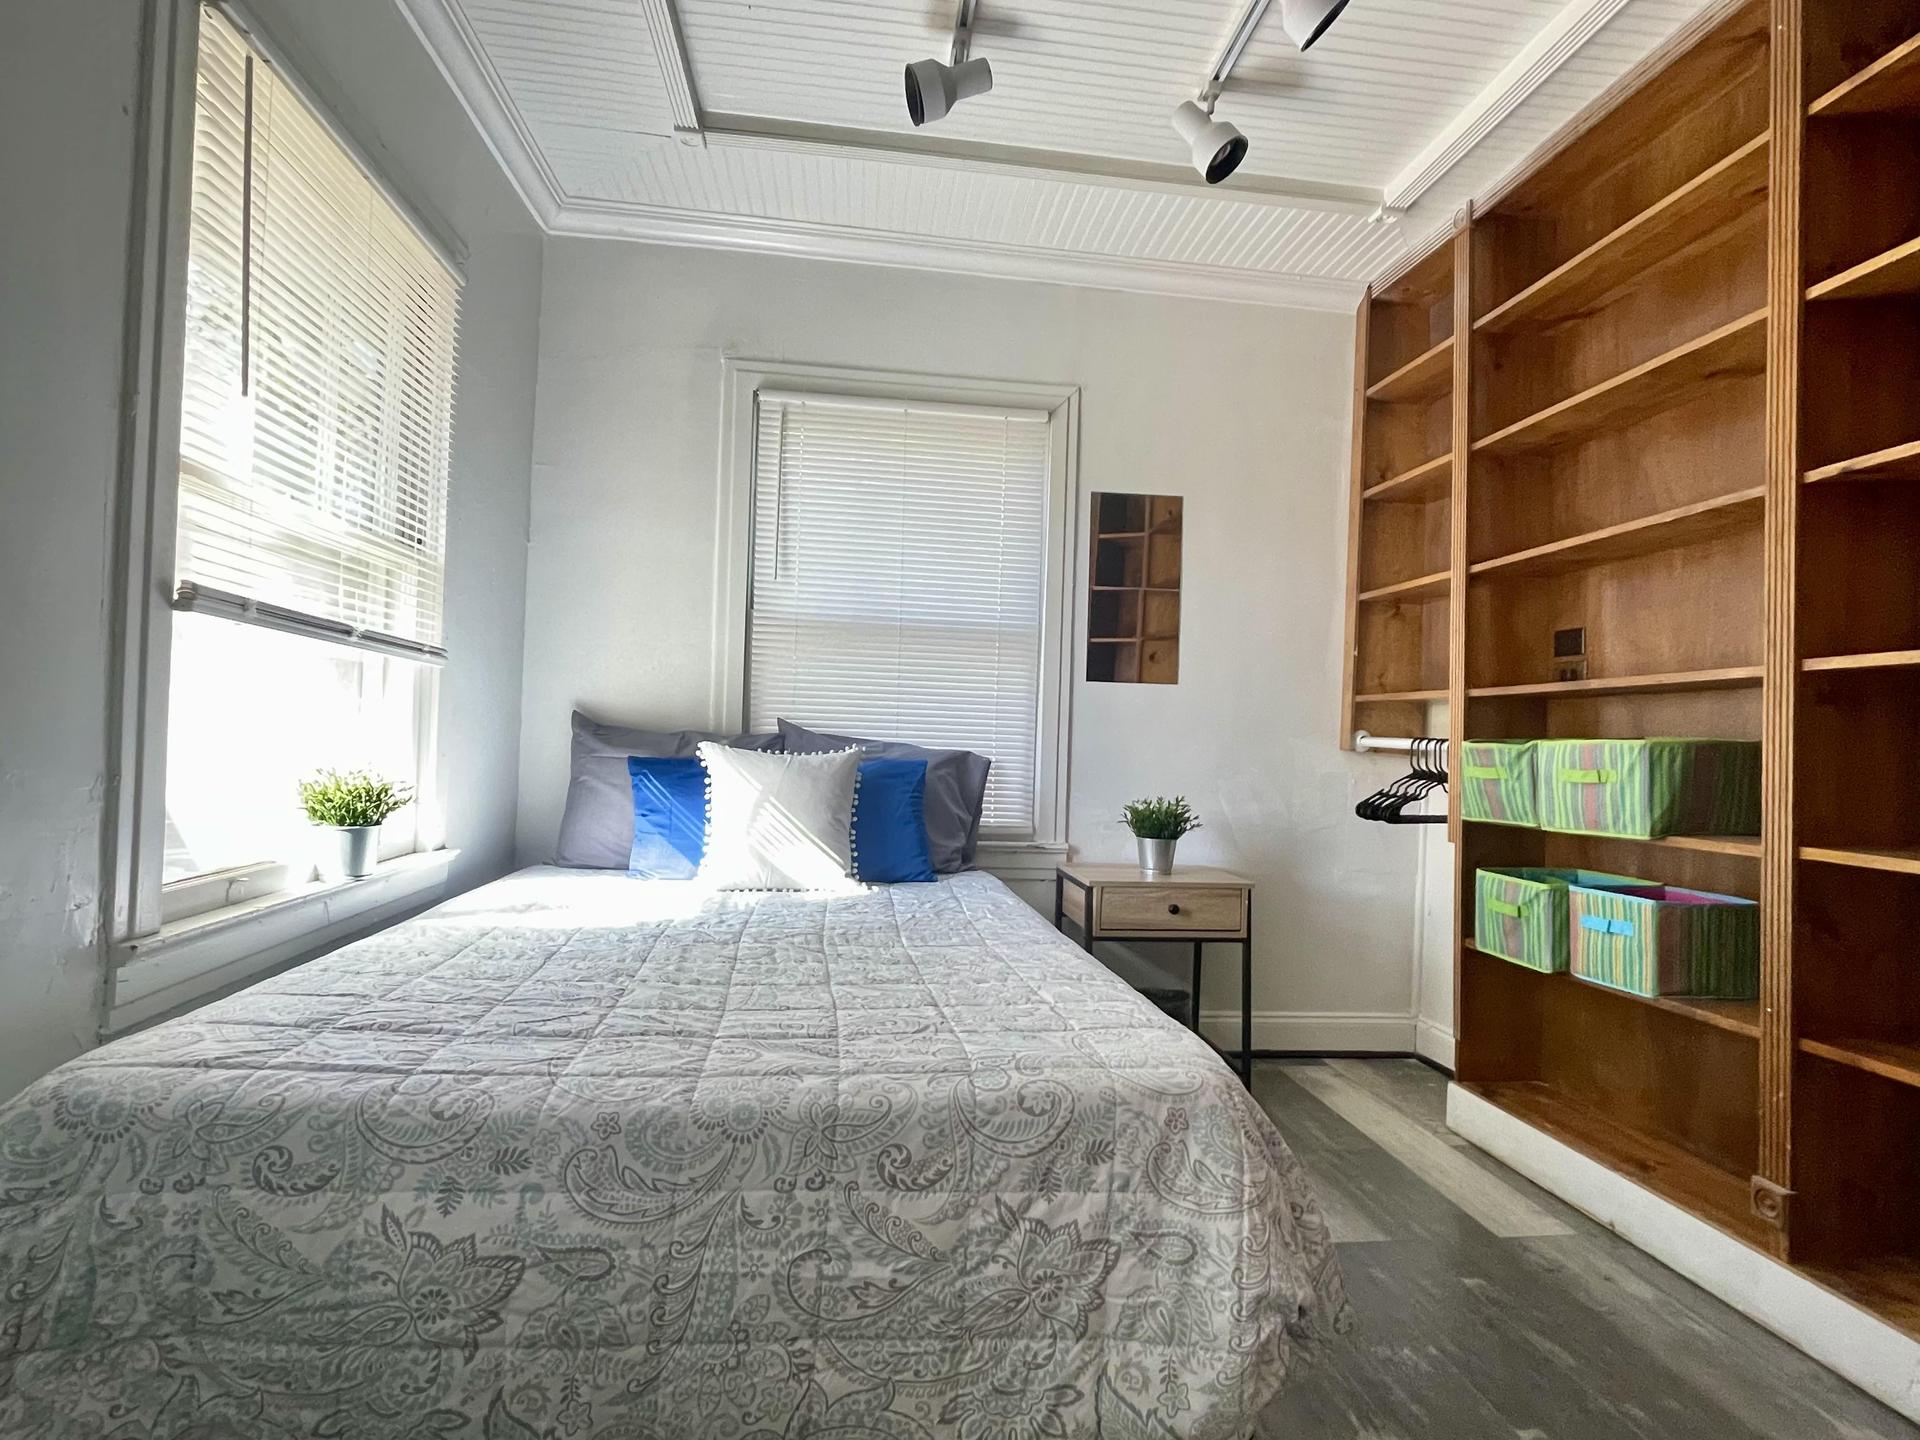 This bedroom has custom wood shelving which is amazing for organization! Great natural light.